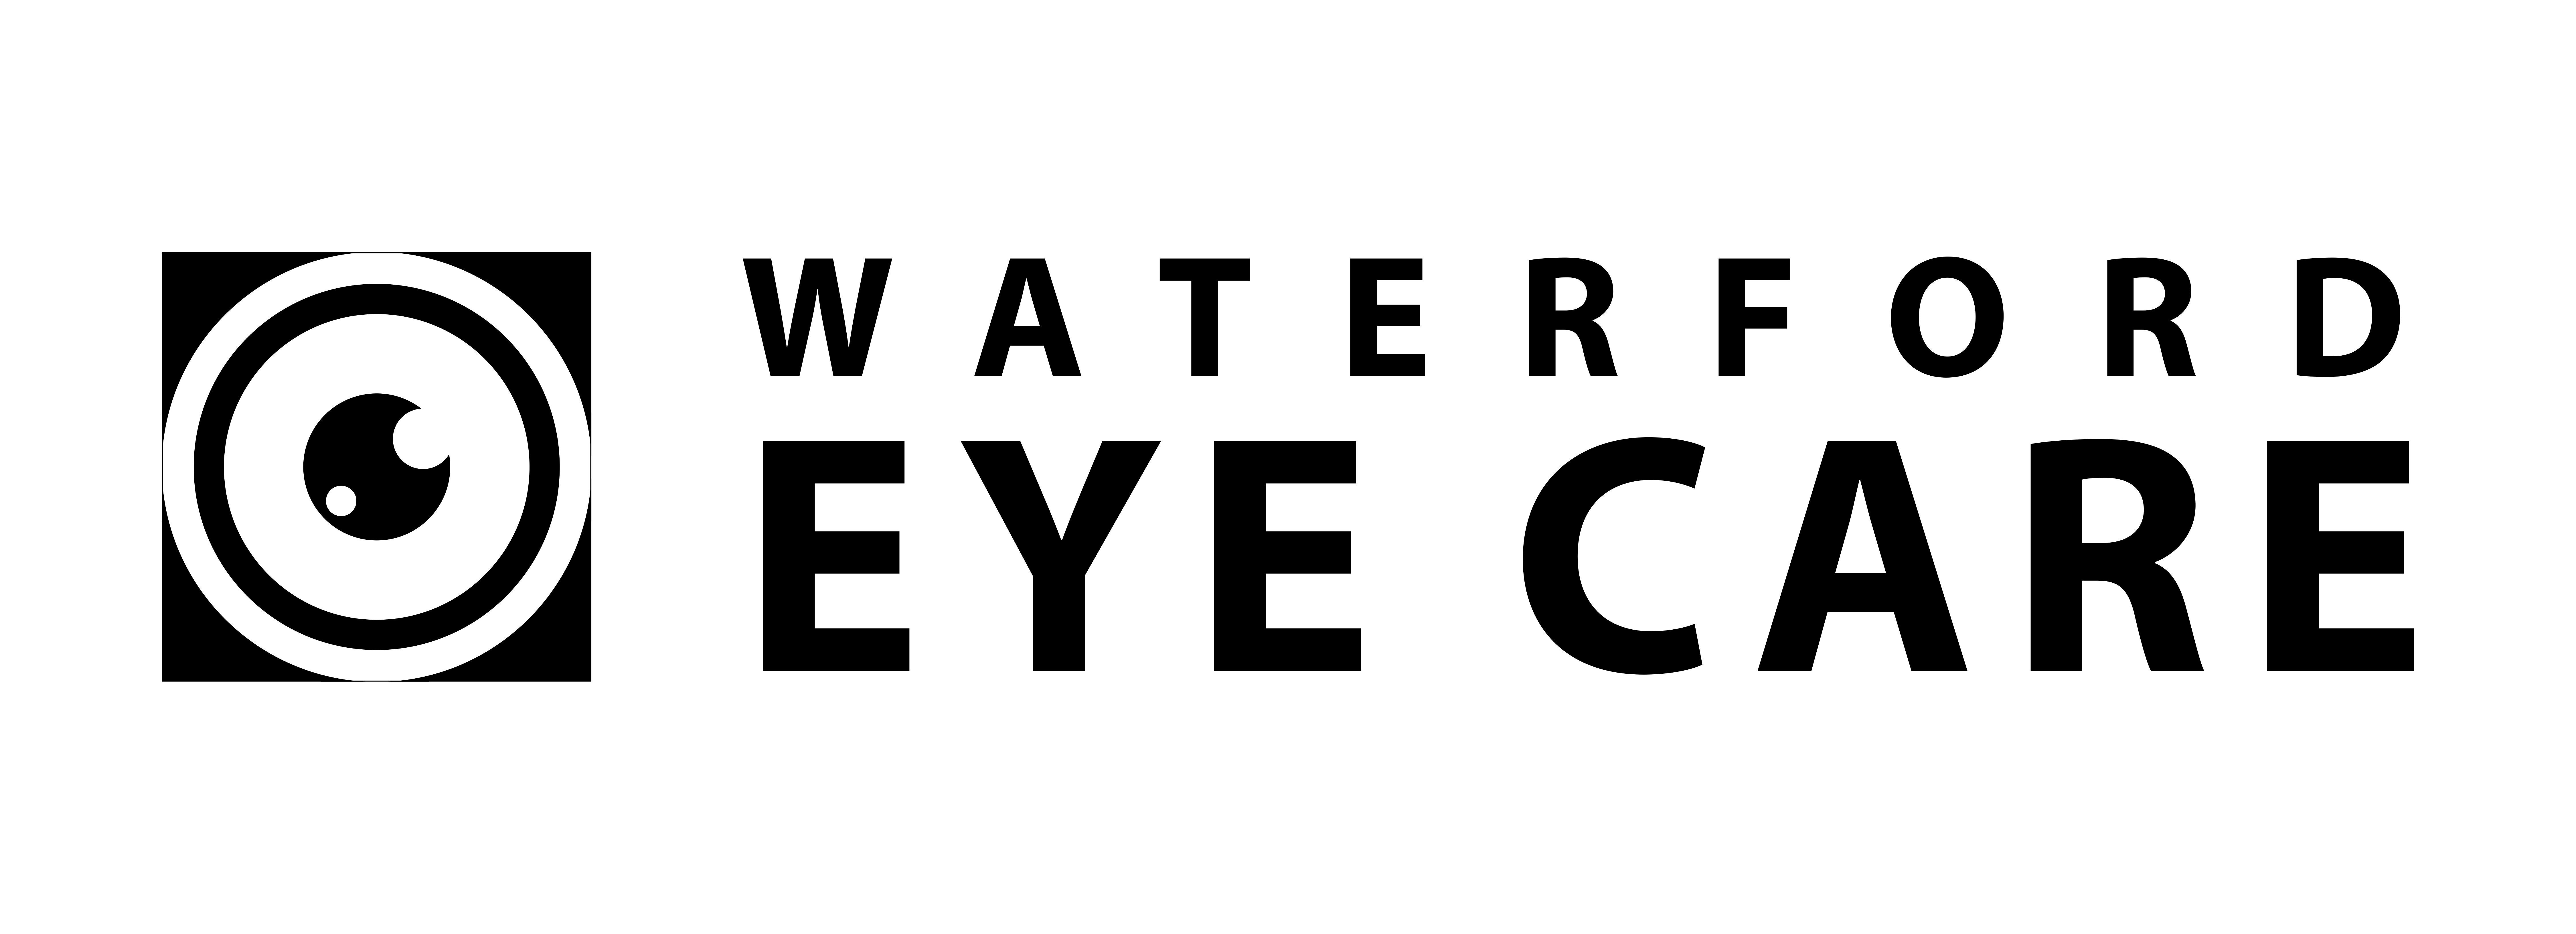 Waterford Eye Care